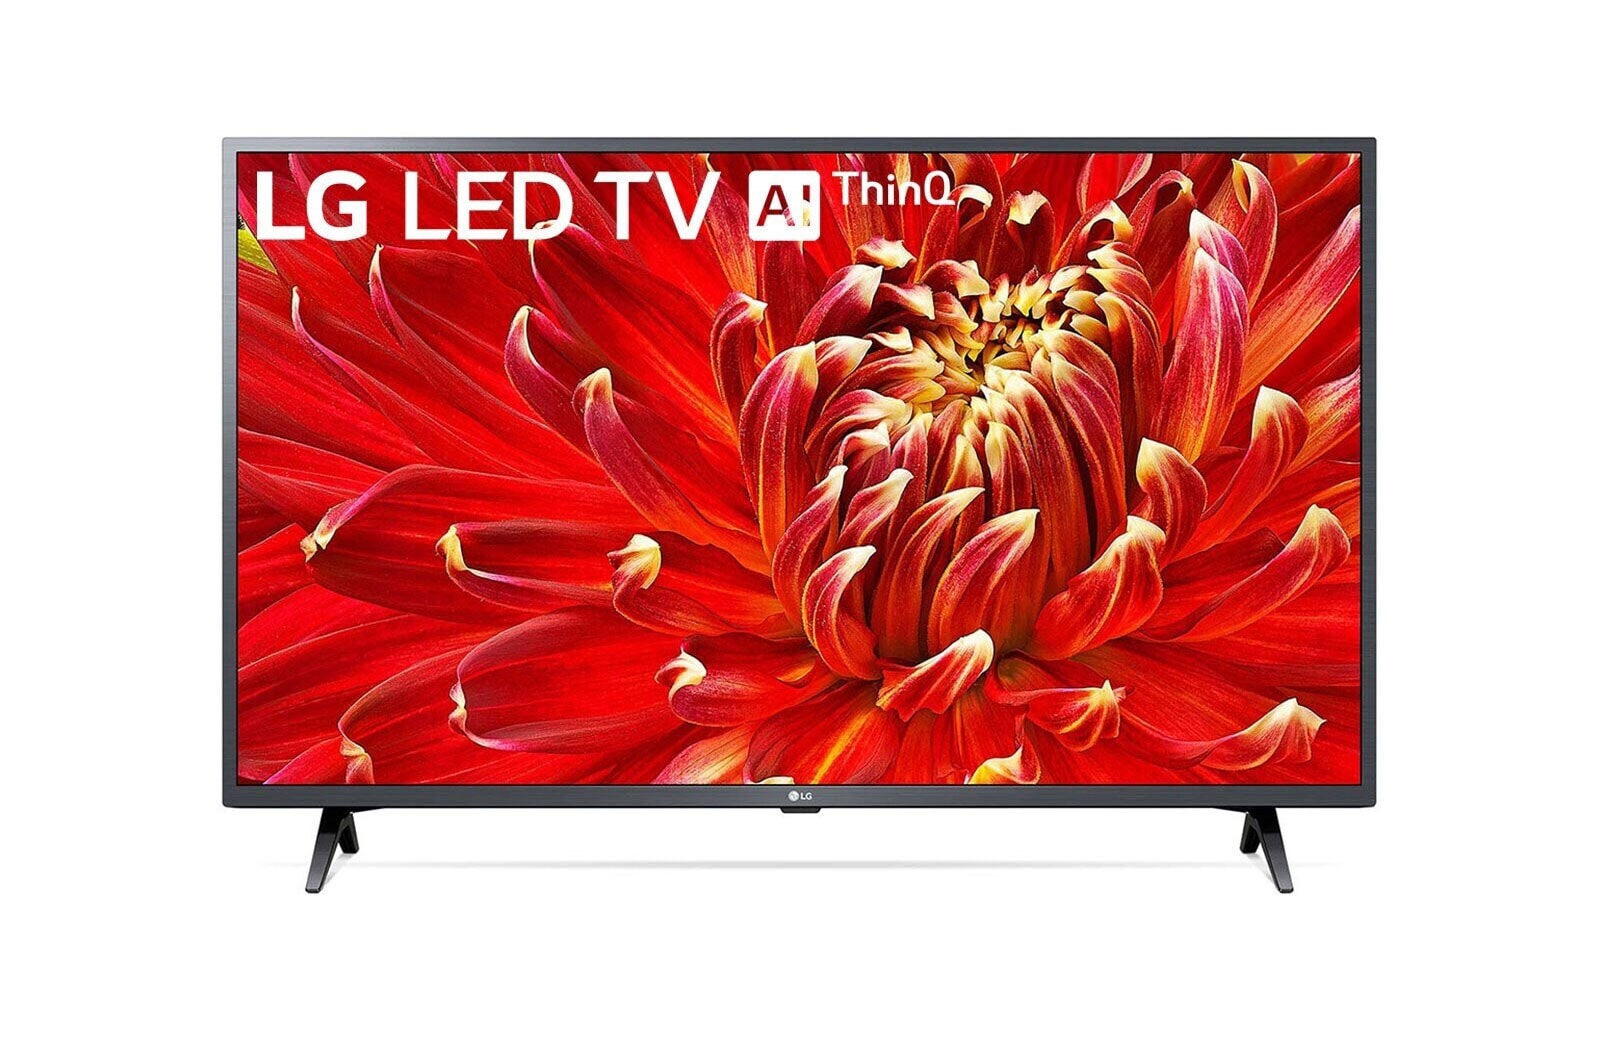 LG LED Smart TV 43 inch LM6370 Series Full HD HDR Smart LED TV, front view with infill image, 43LM6370PVA